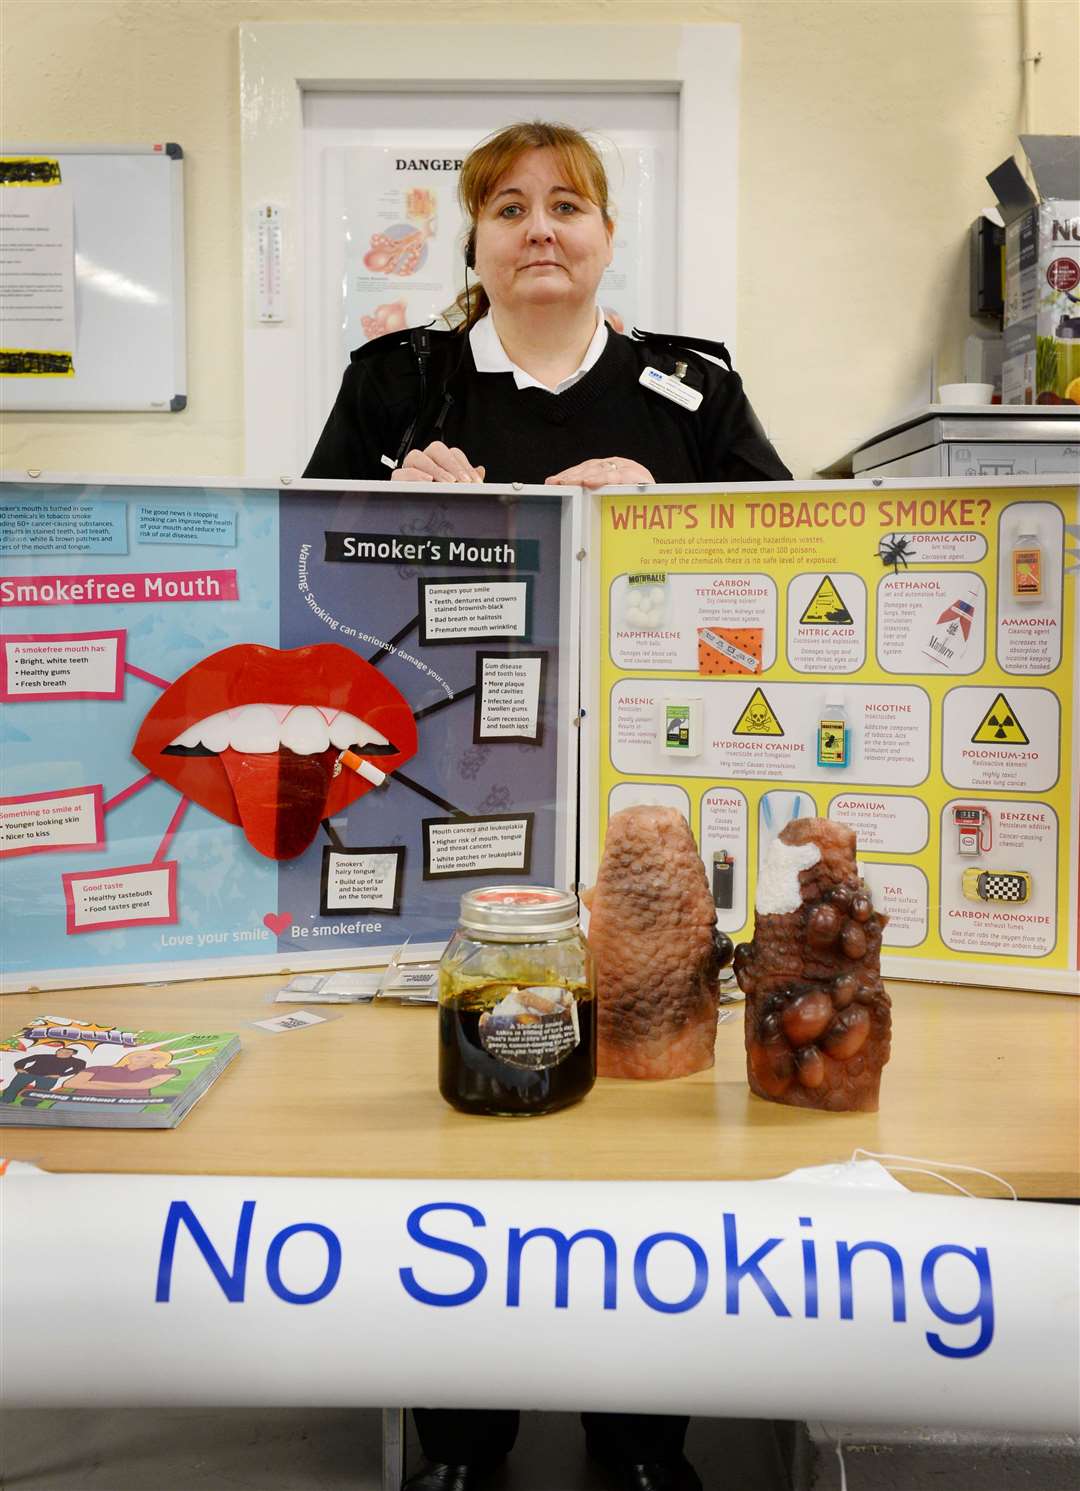 Sheena Macsporran, SPS offender outcomes officer provides advice following the introduction of a no smoking policy.